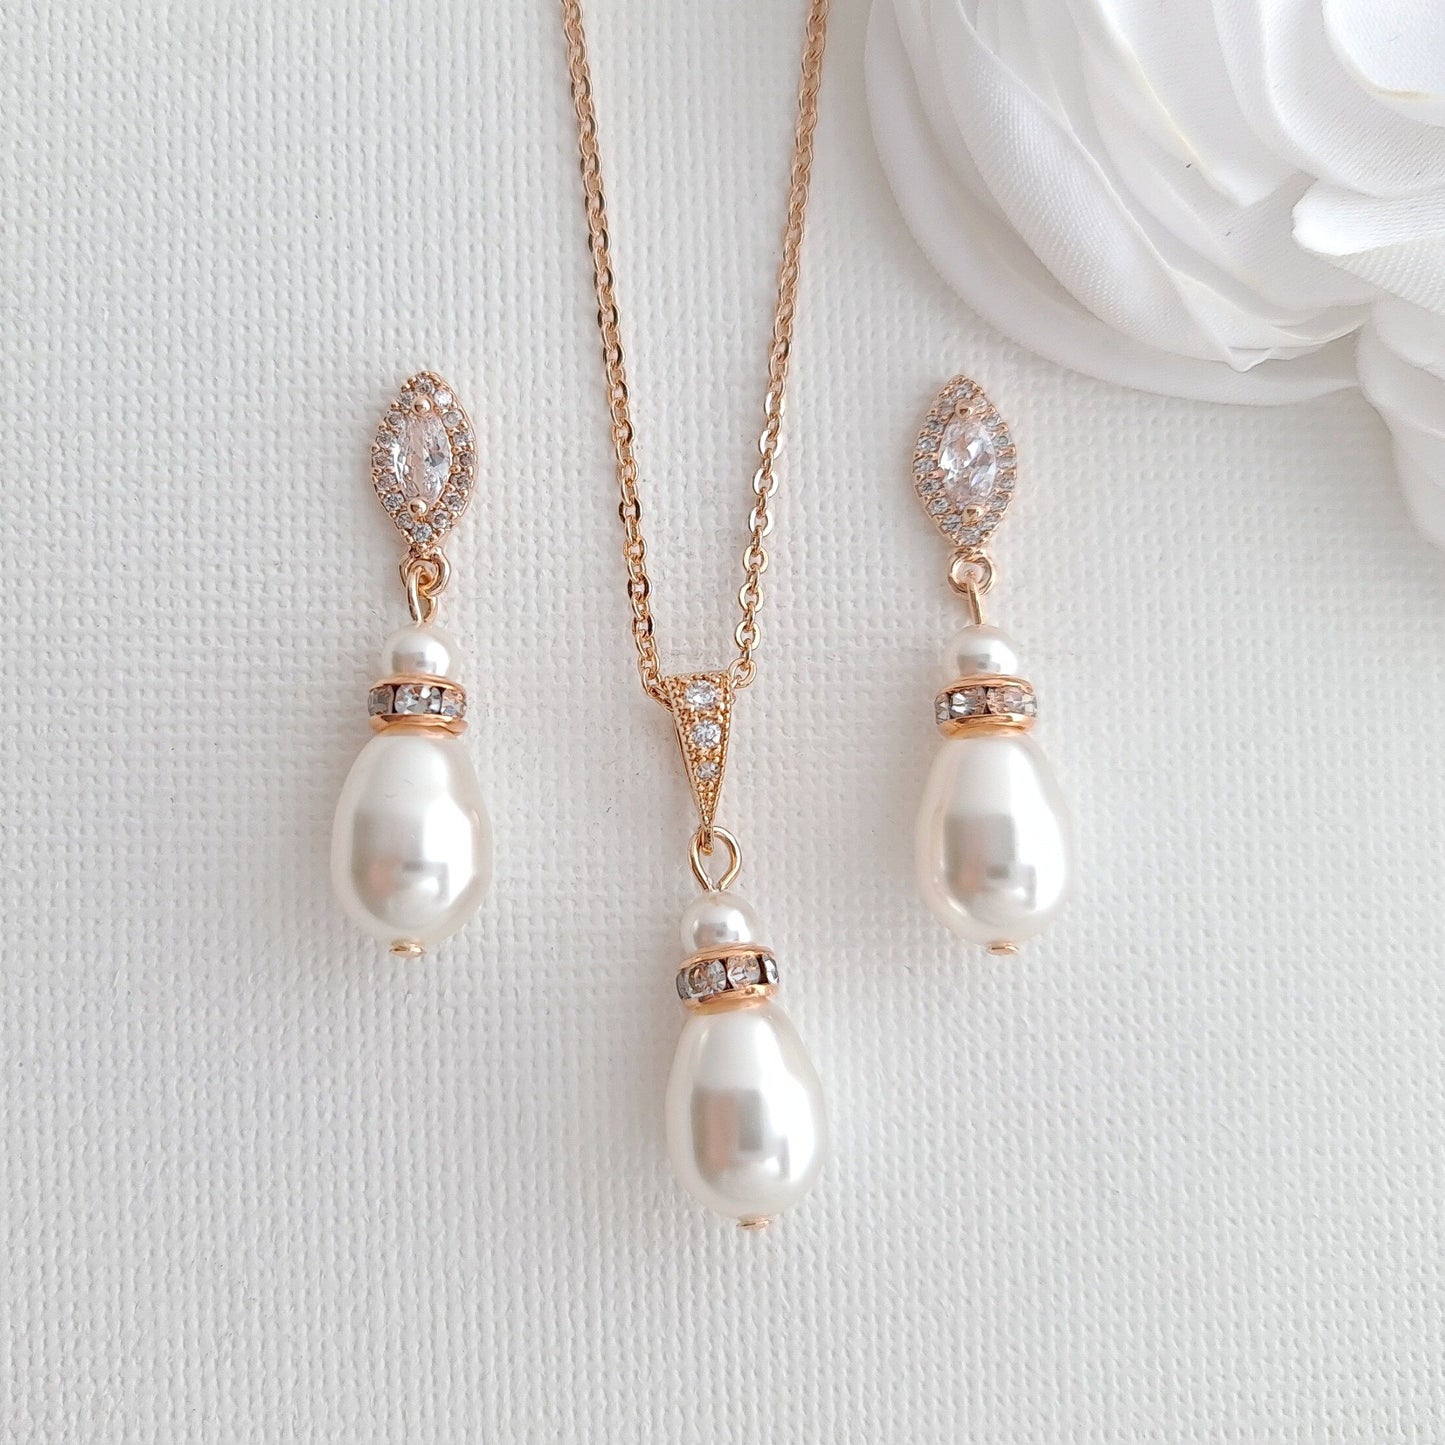 Jewelry Set for Brides With Pearl Bracelet+Pearl Earrings+Pearl Necklace-Ella - PoetryDesigns